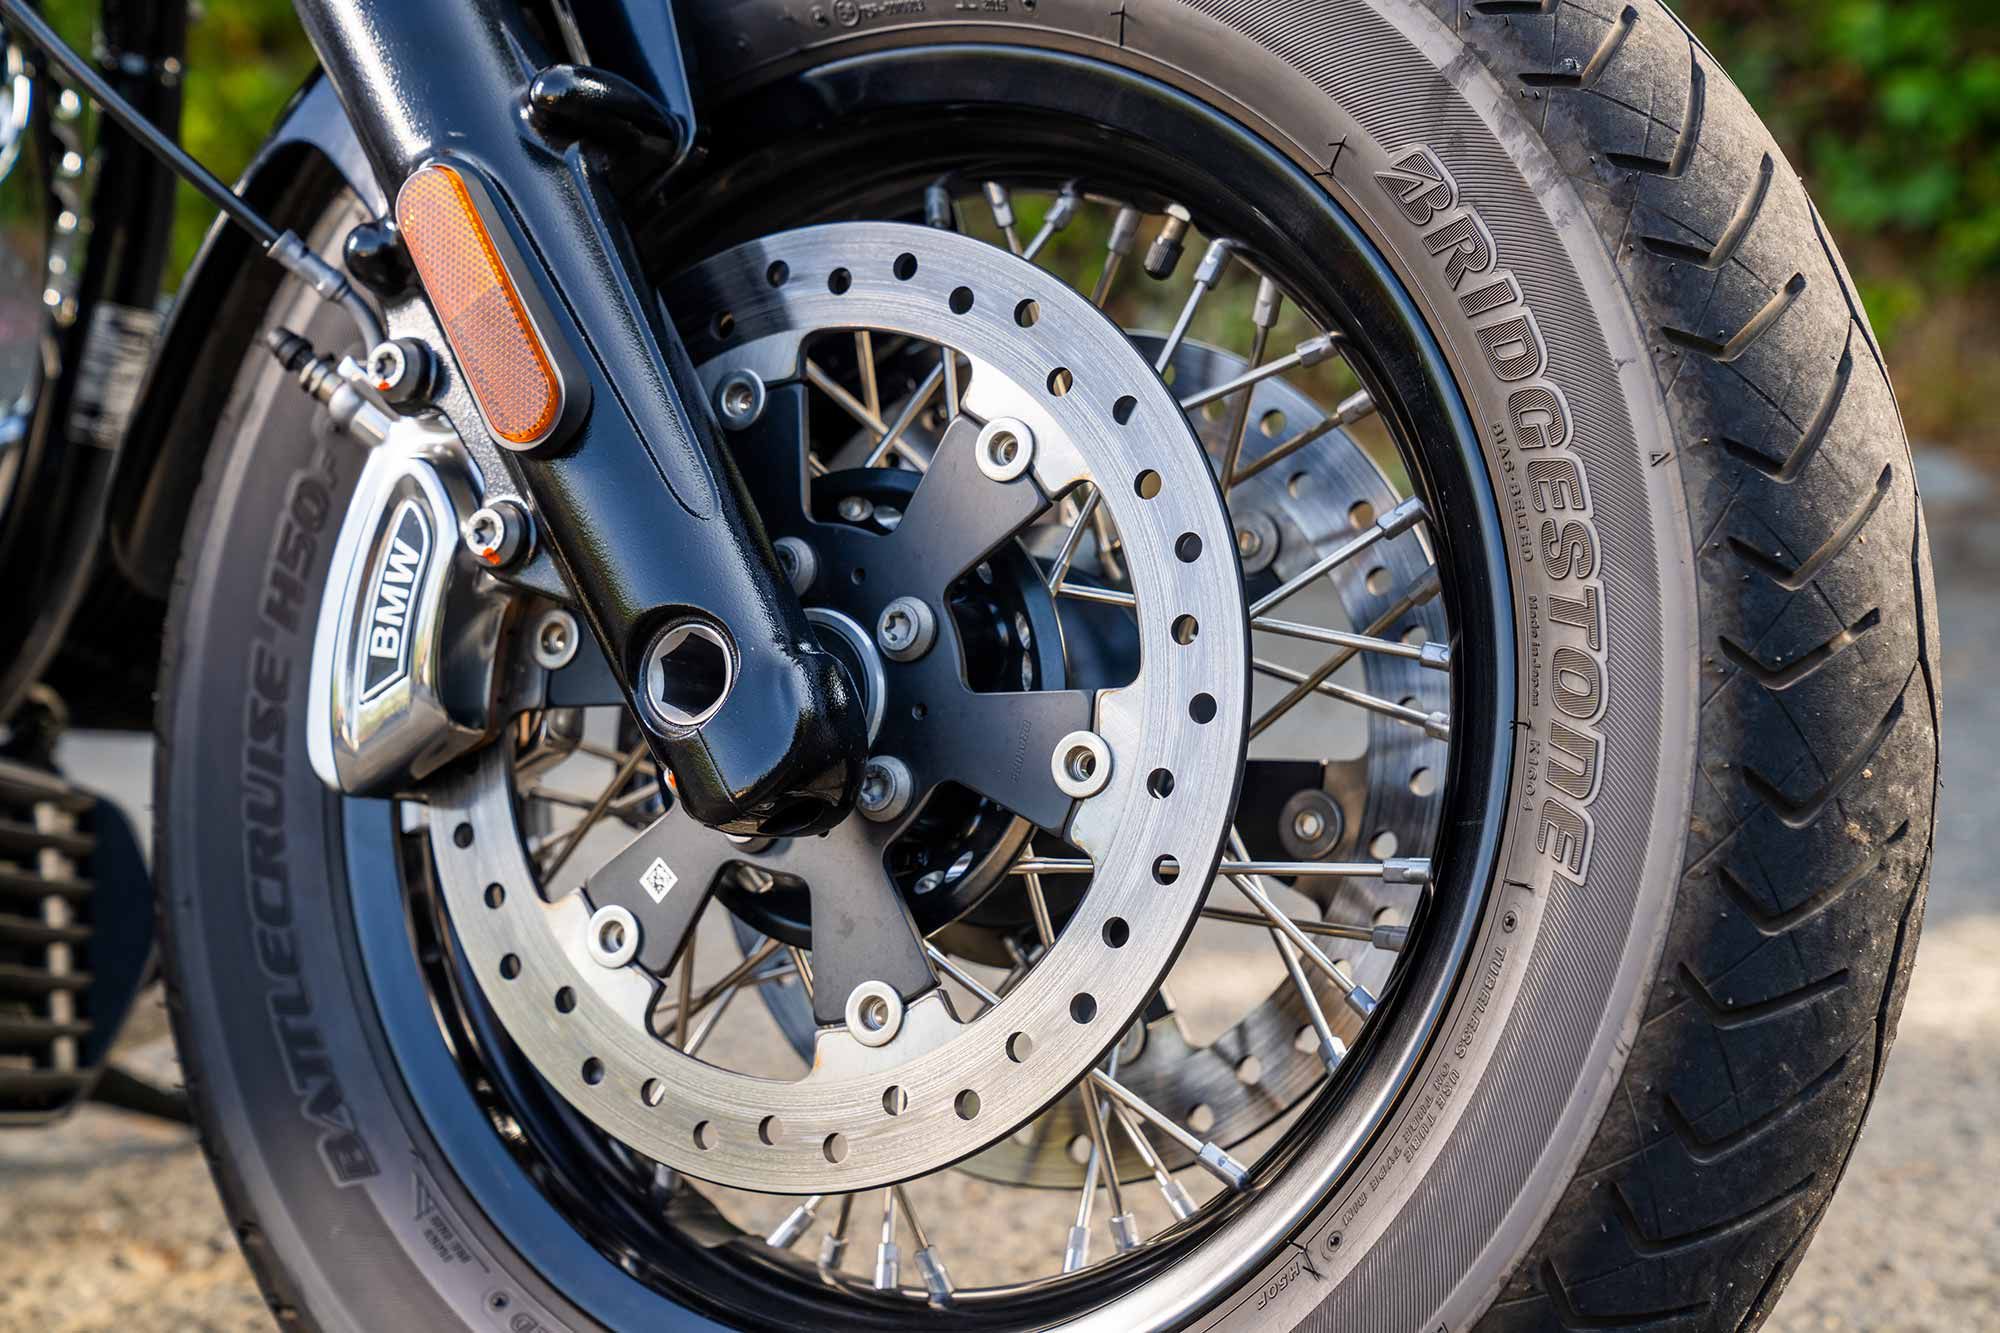 Triple-disc hydraulic brakes with equally sized discs and calipers keep speed in check for this 805-pound cruiser. The brakes offer pleasing calibration and are neither too soft, nor too sharp.